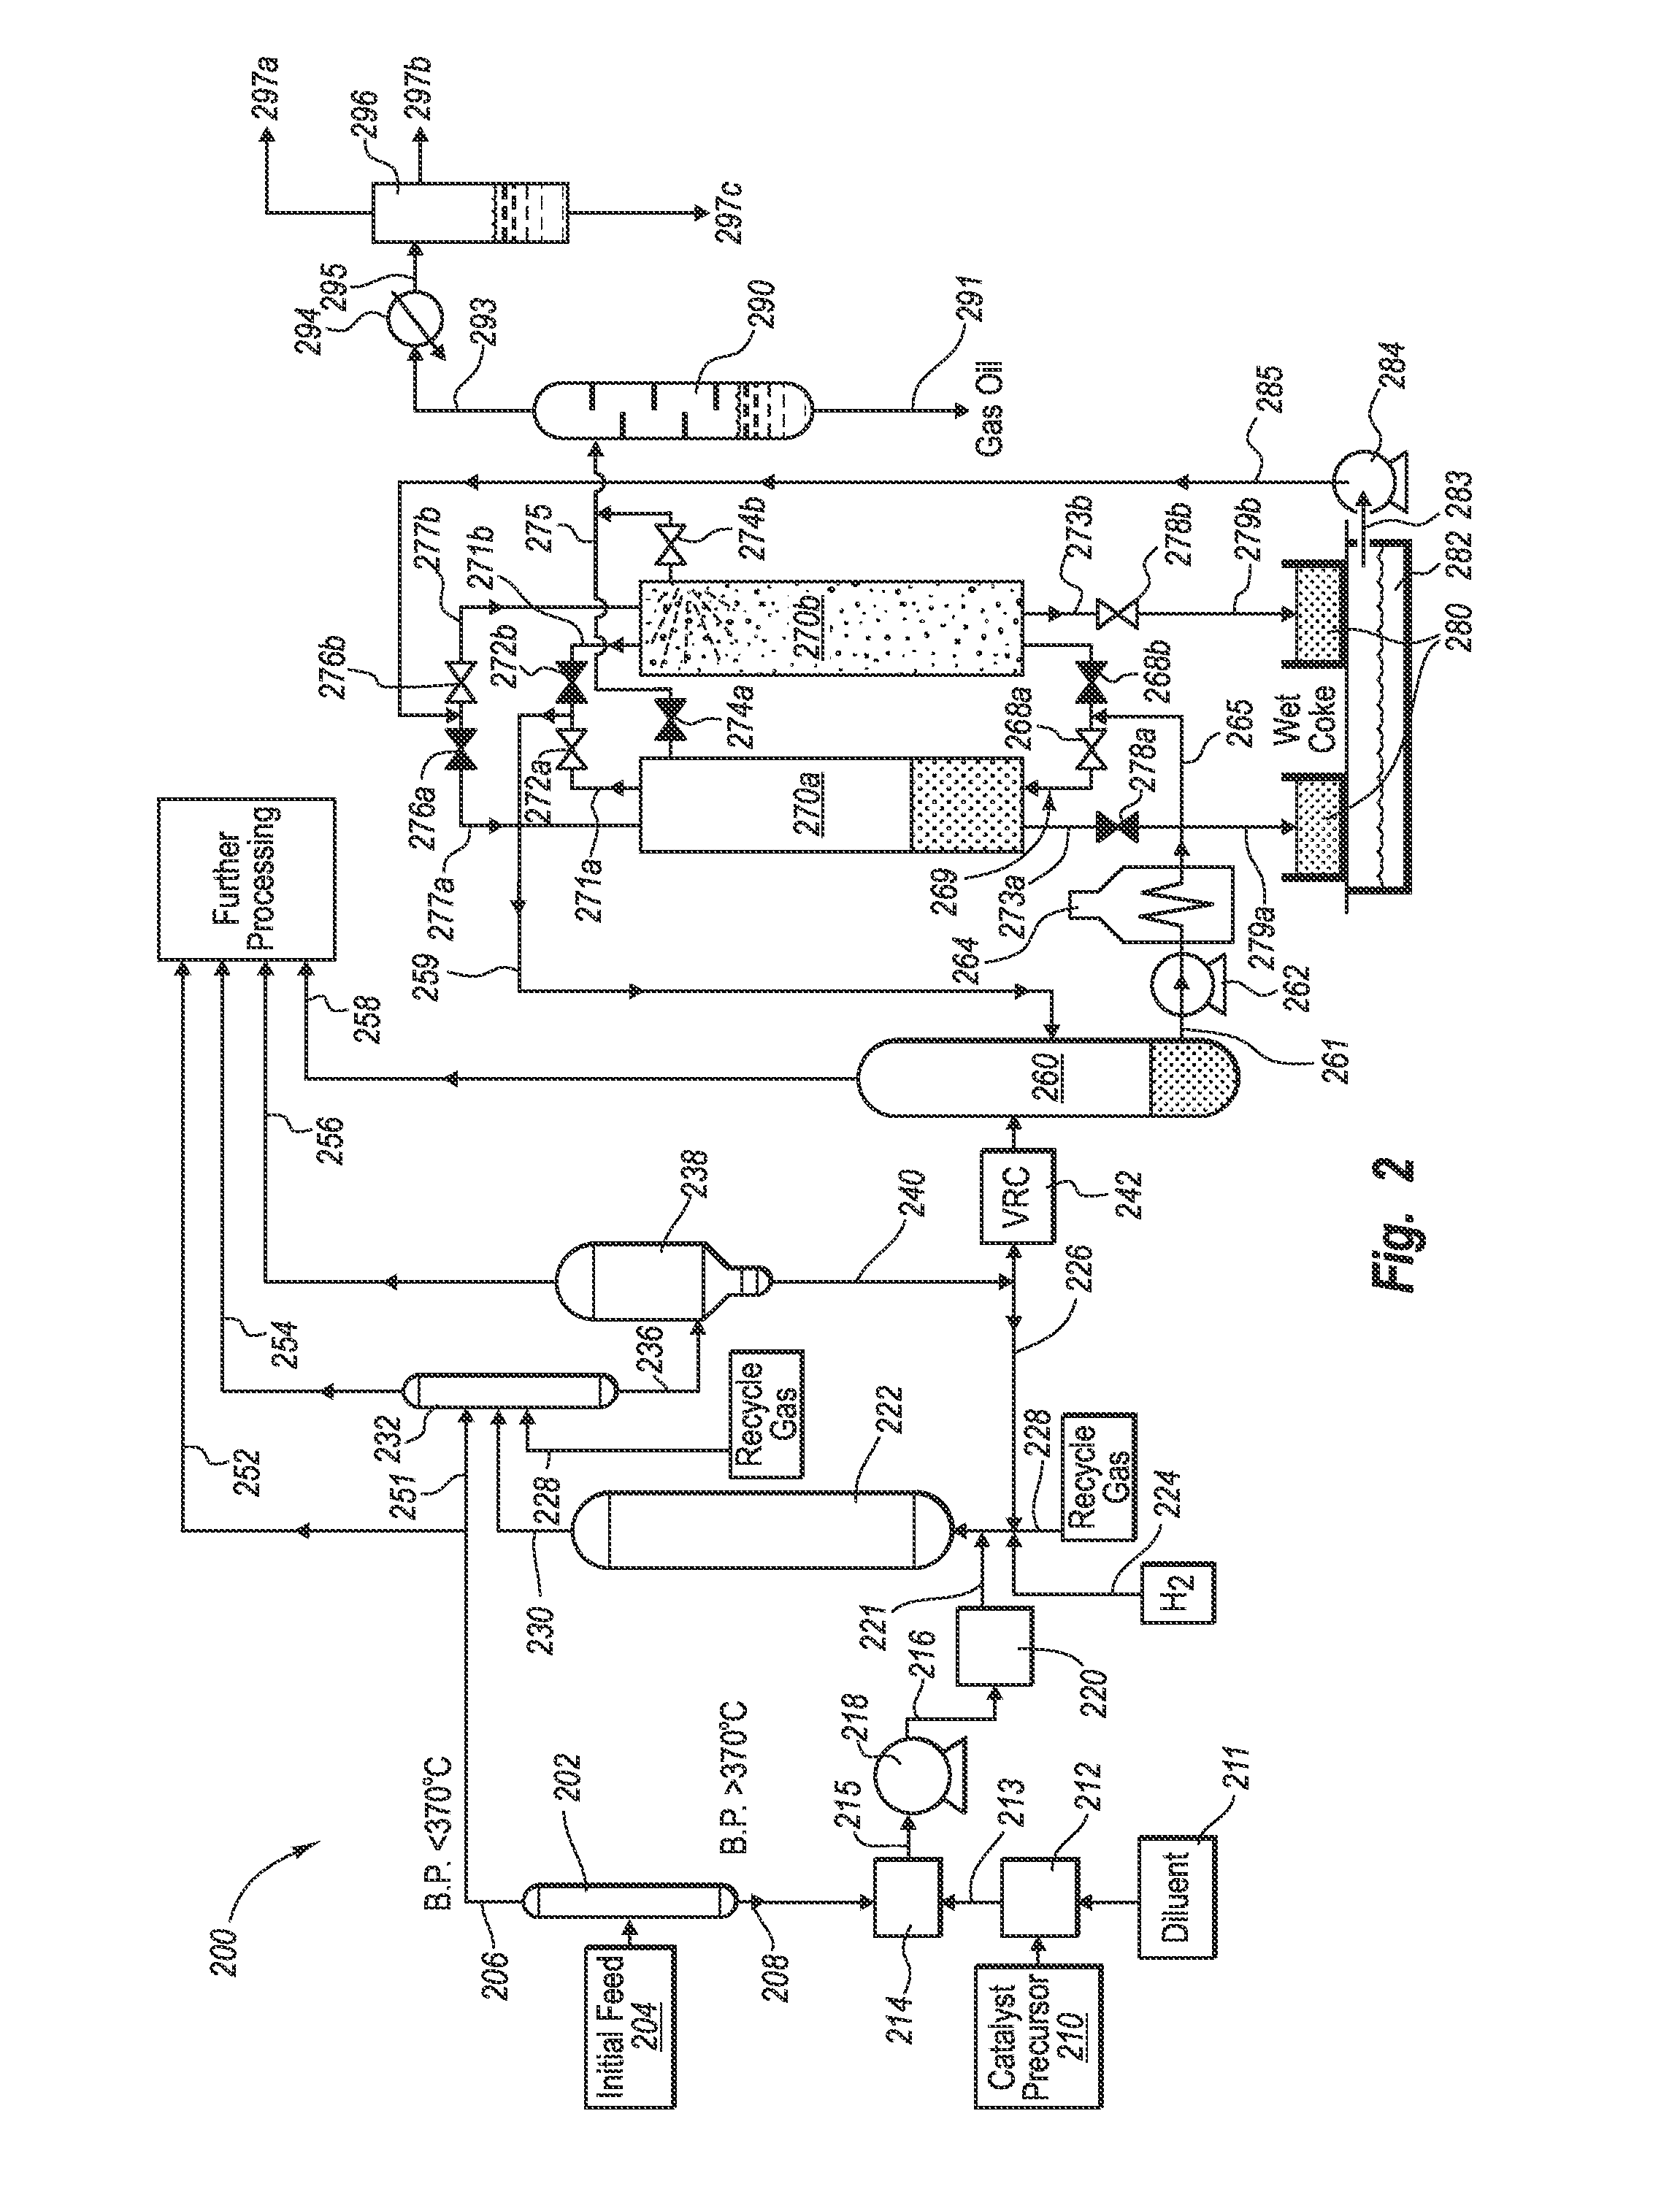 Apparatus and systems for upgrading heavy oil using catalytic hydrocracking and thermal coking